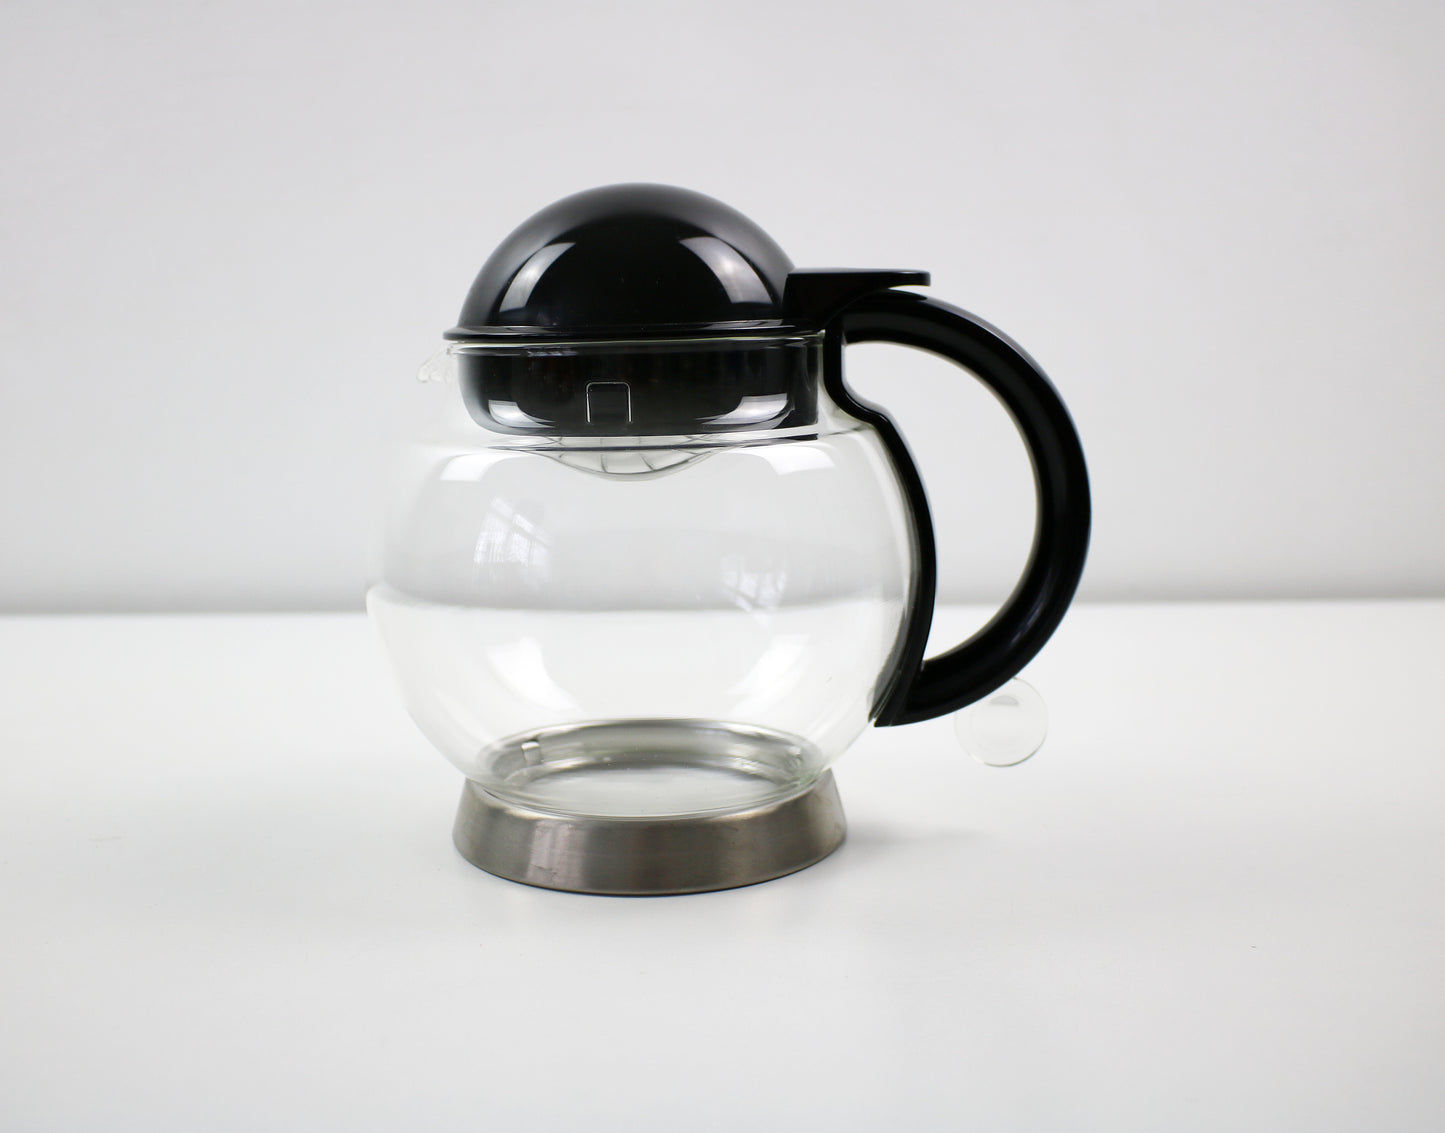 Space age glass and black plastic Emsa Tea Master teapot with infuser Y2k vintage